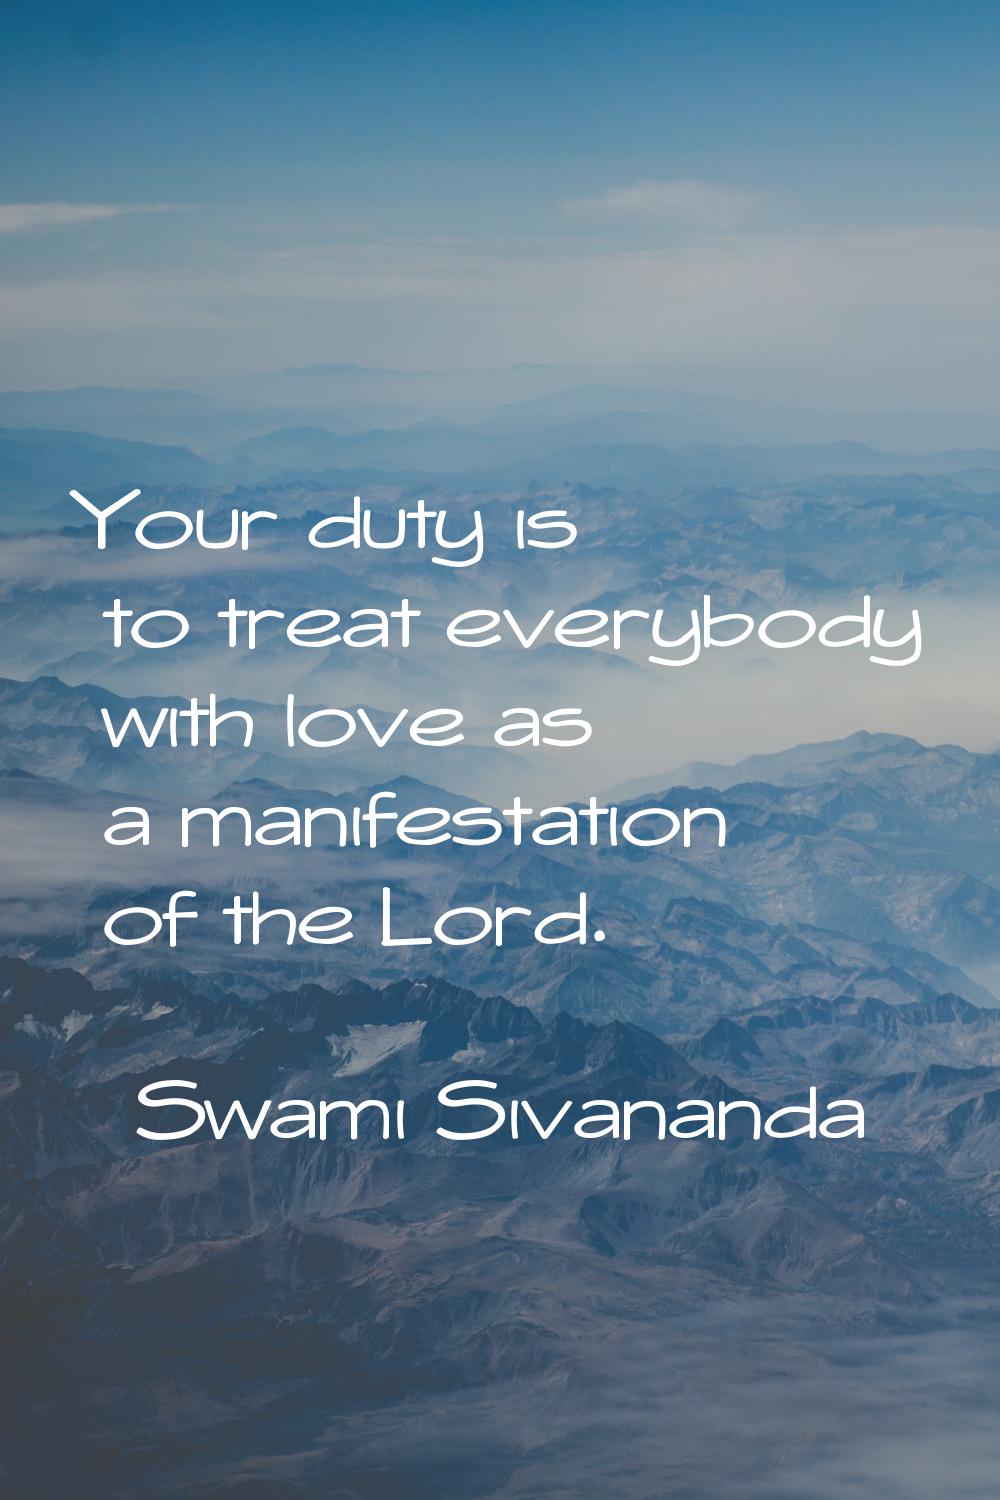 Your duty is to treat everybody with love as a manifestation of the Lord.